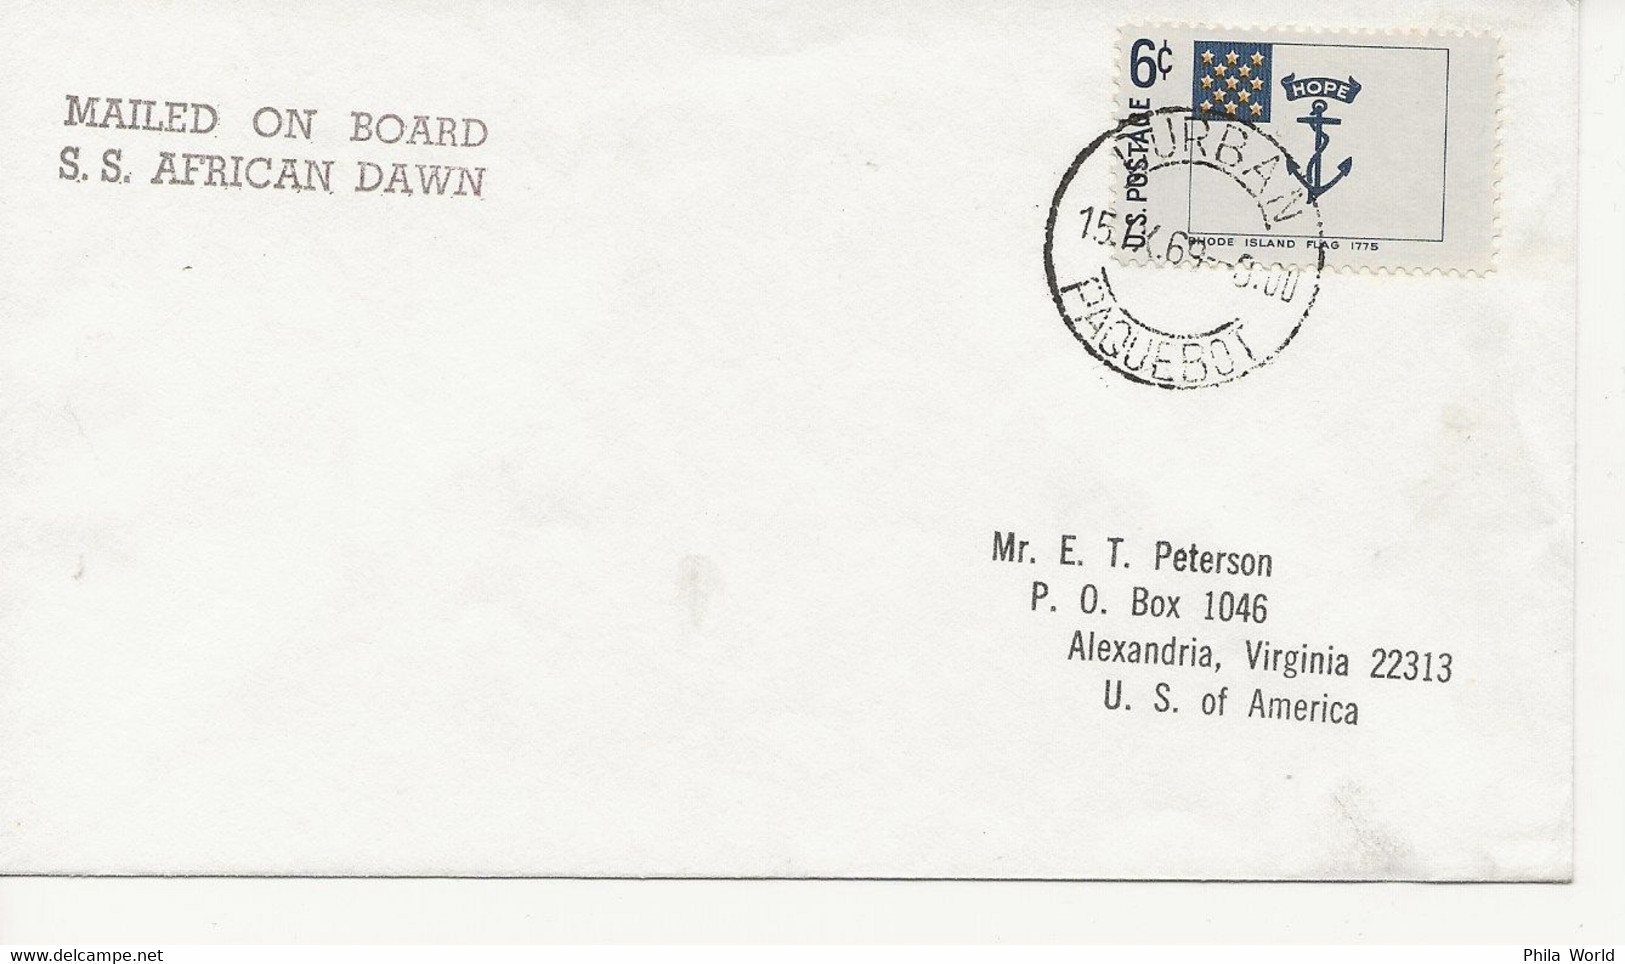 MAILED ON BOARD 1976 COMBINED DURBAN South Africa / PAQUEBOT MARK 1969 USA FRANKING Landed From SS AFRICAN DAWN - Bateaux